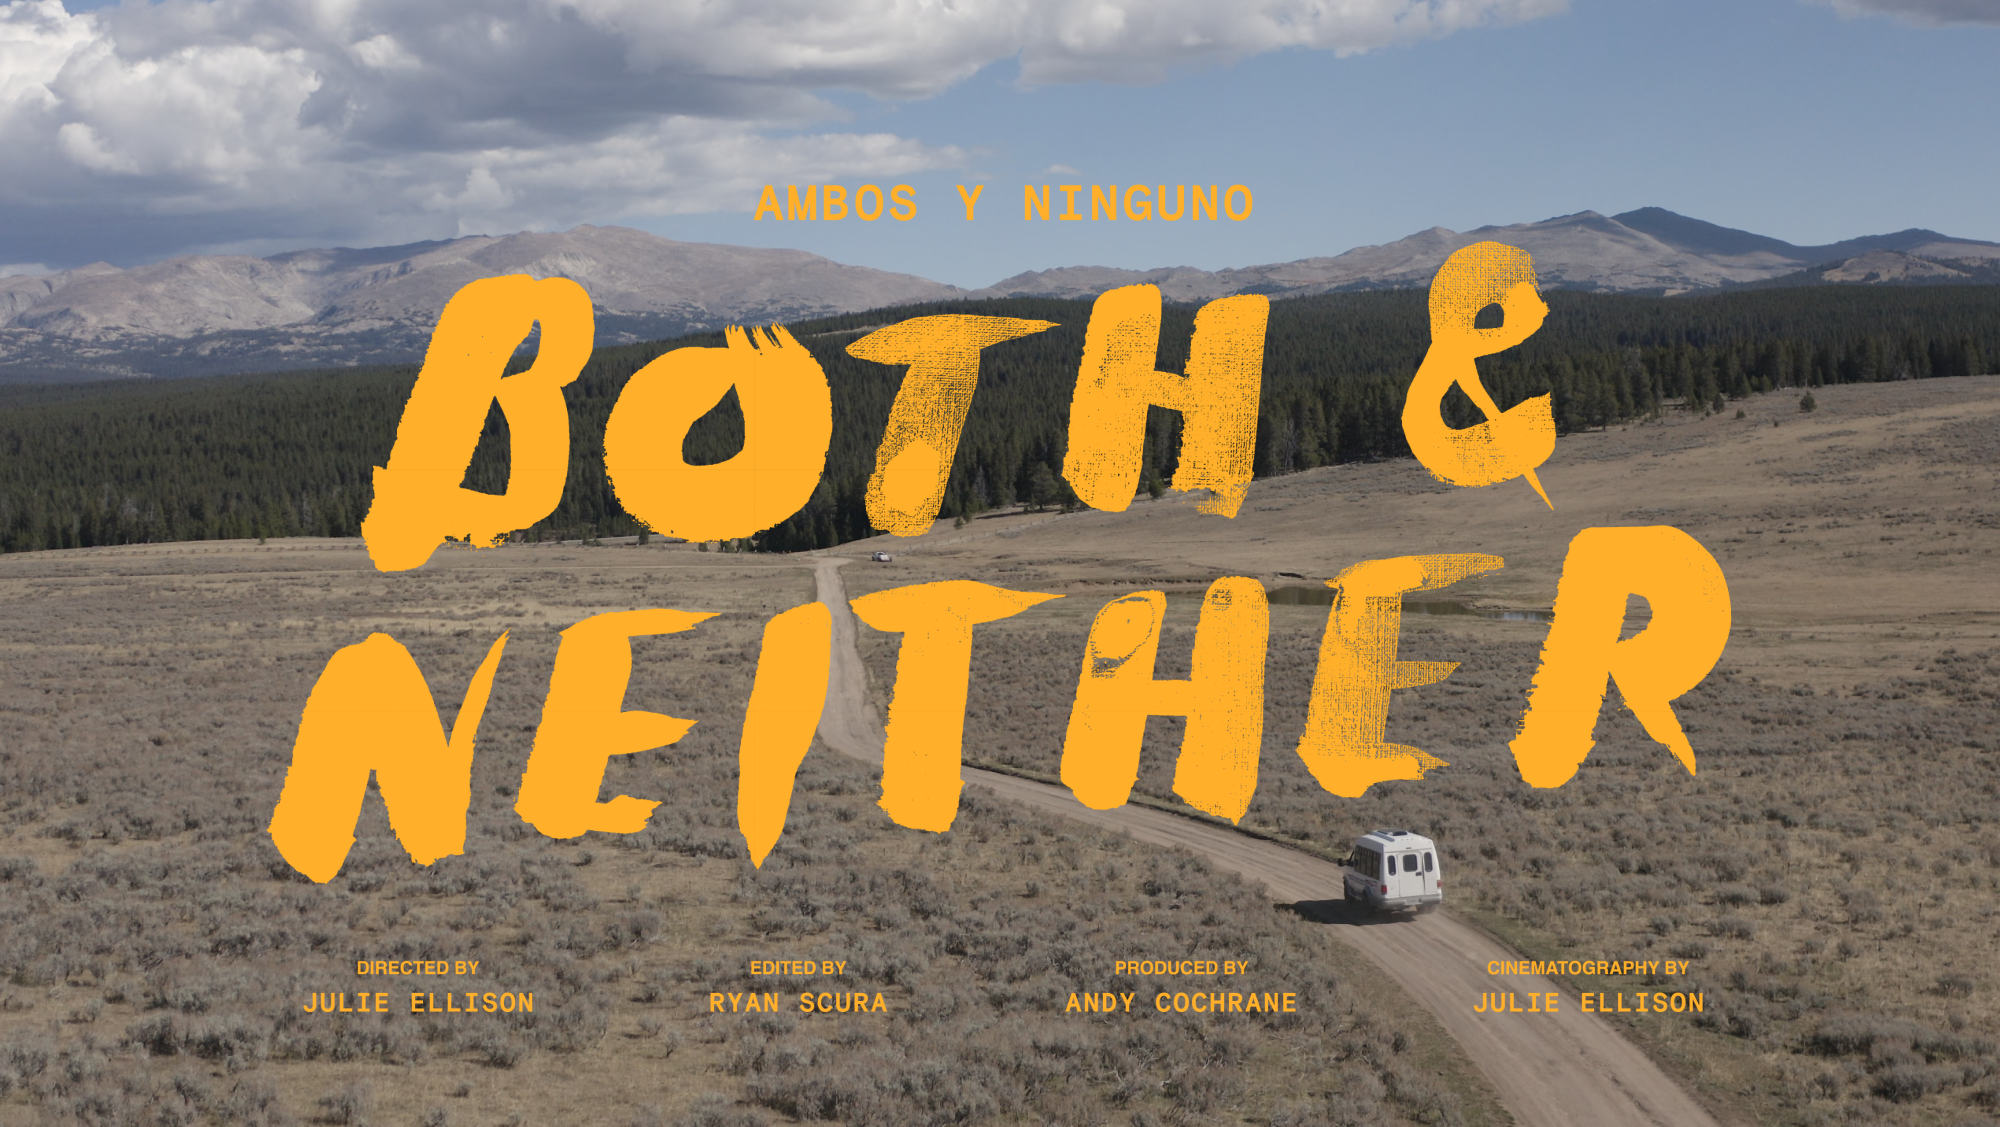 AMBOS Y NINGUNO subhead, Both & Neither film title card. Directed by Julie Ellison, Edited by Ryan Scura, Produced by Andy Cochrane, Cinematography by Julie Ellison. Image of a van on a dirt road driving towards pine and mountains.